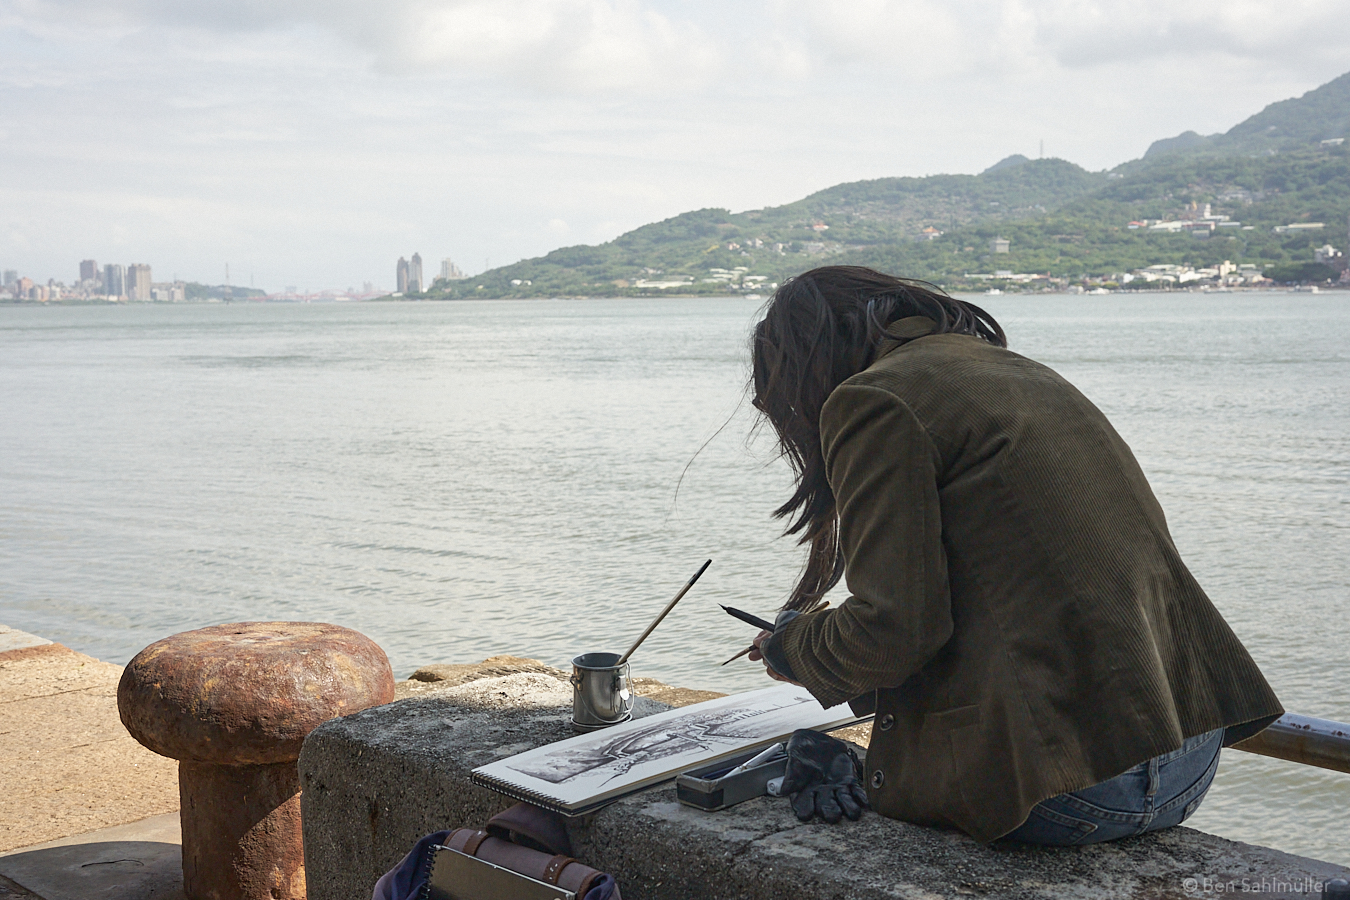 A woman sitting at the Tamsui River in Taipei, drawing the landscape with ink on a wide sheet of paper on the stone bench in front of her. She seems focused on her work and serene.